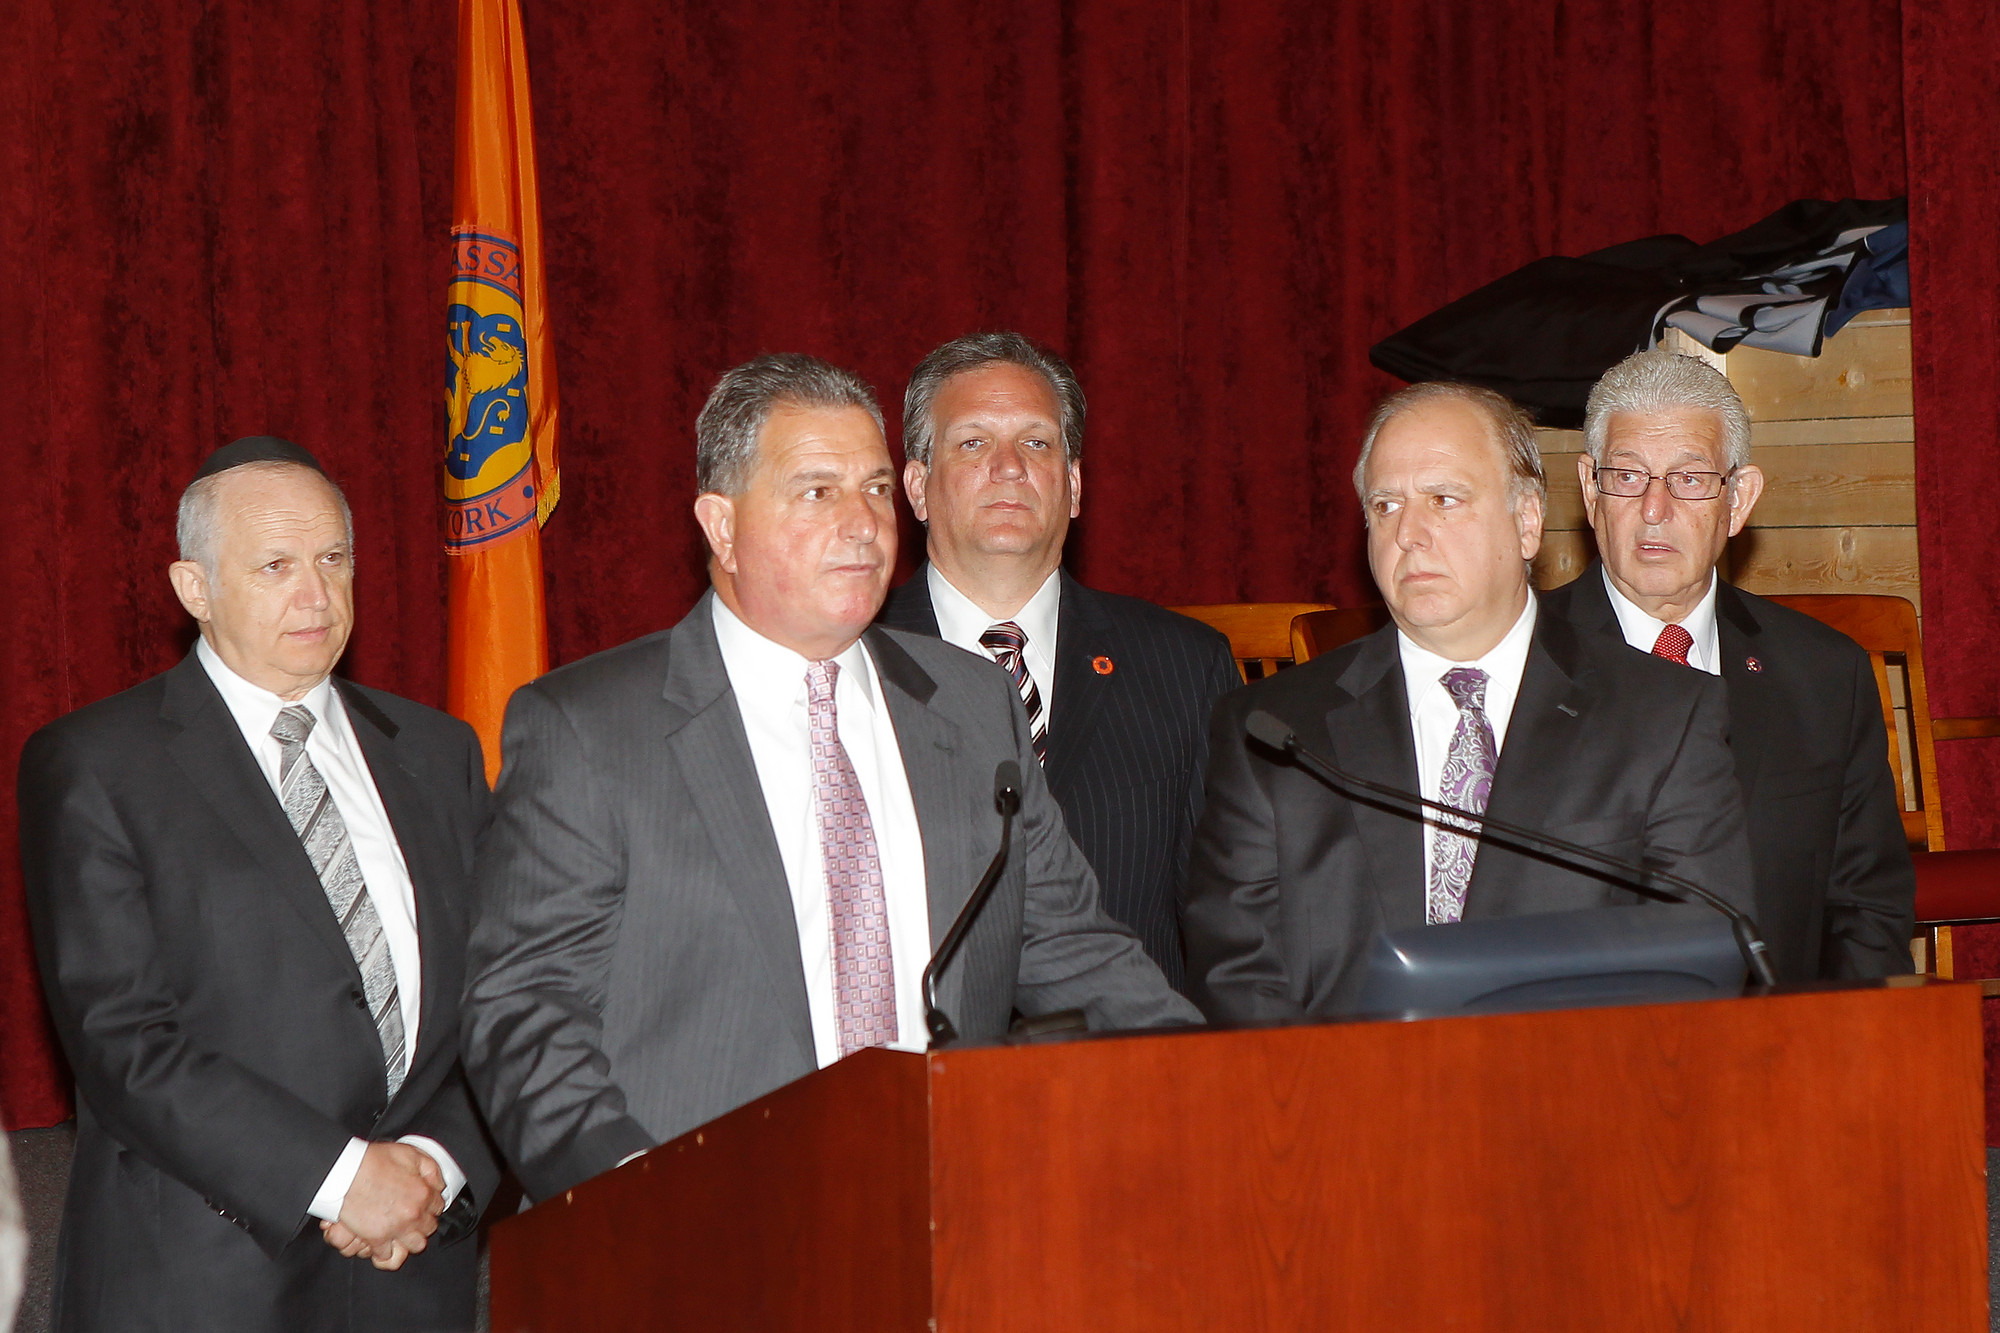 Chaim Weiss's father Anton Weiss, left, Detective Lt. John Azzata, County Executive Ed Mangano, Chief of Detectives Rick Capece and Police Department Rabbi Barry Dov Schwartz called on the public to help solve the 26-year-old case.